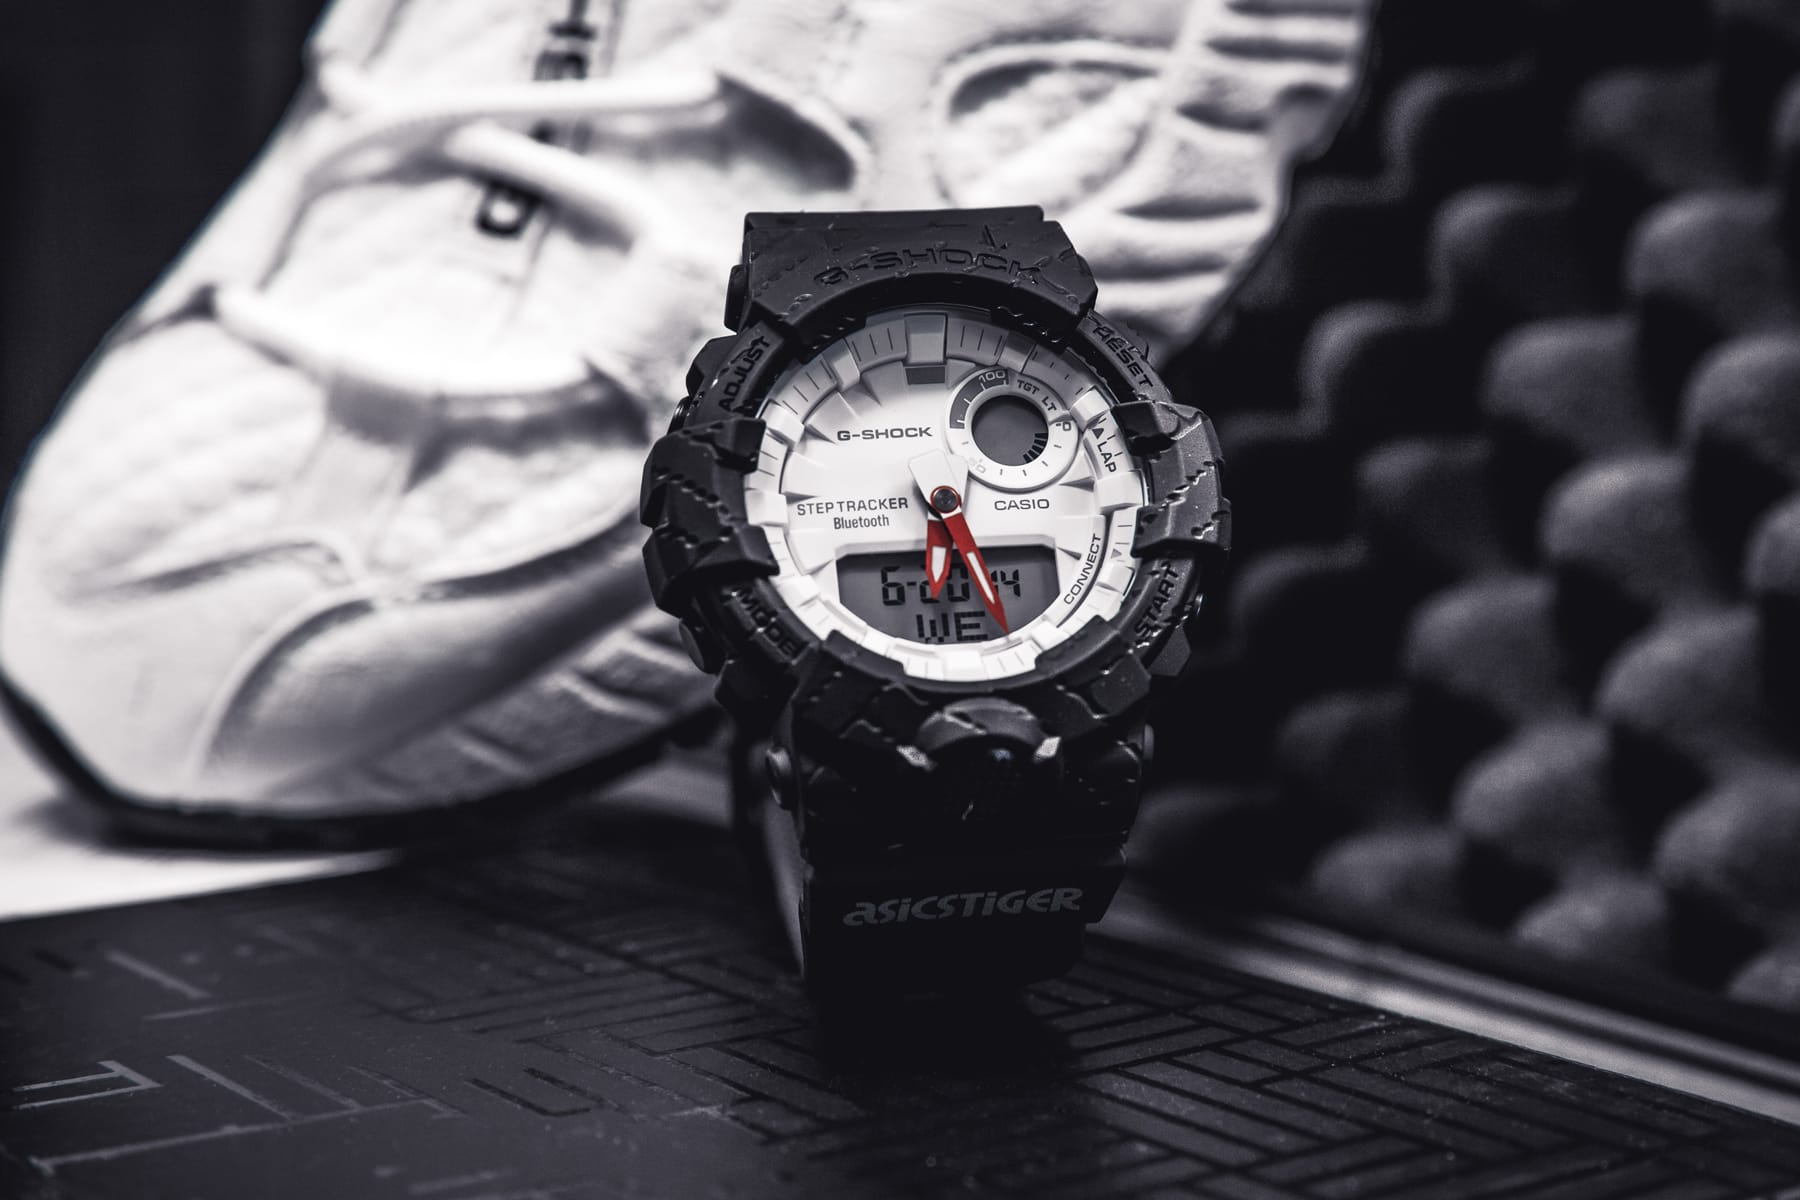 ASICS x G-SHOCK Collab Collector's 